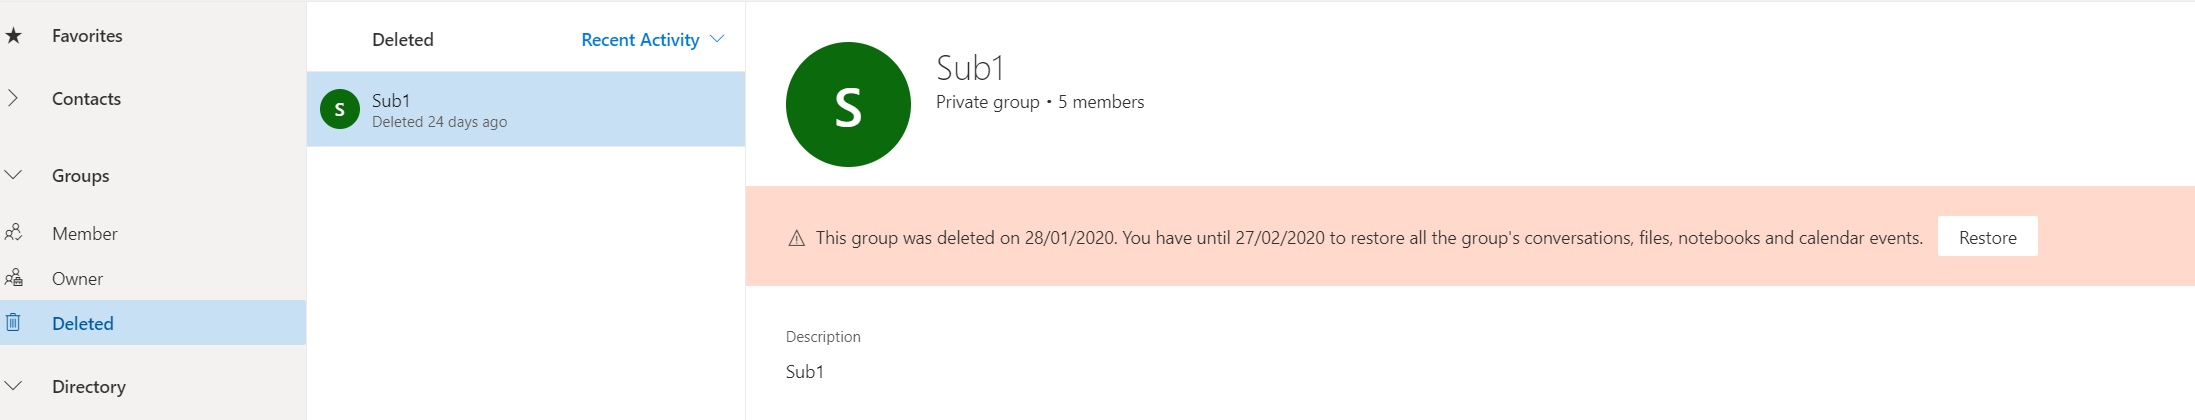 Screenshot of deleted groups selecting Manage groups under the Groups node.